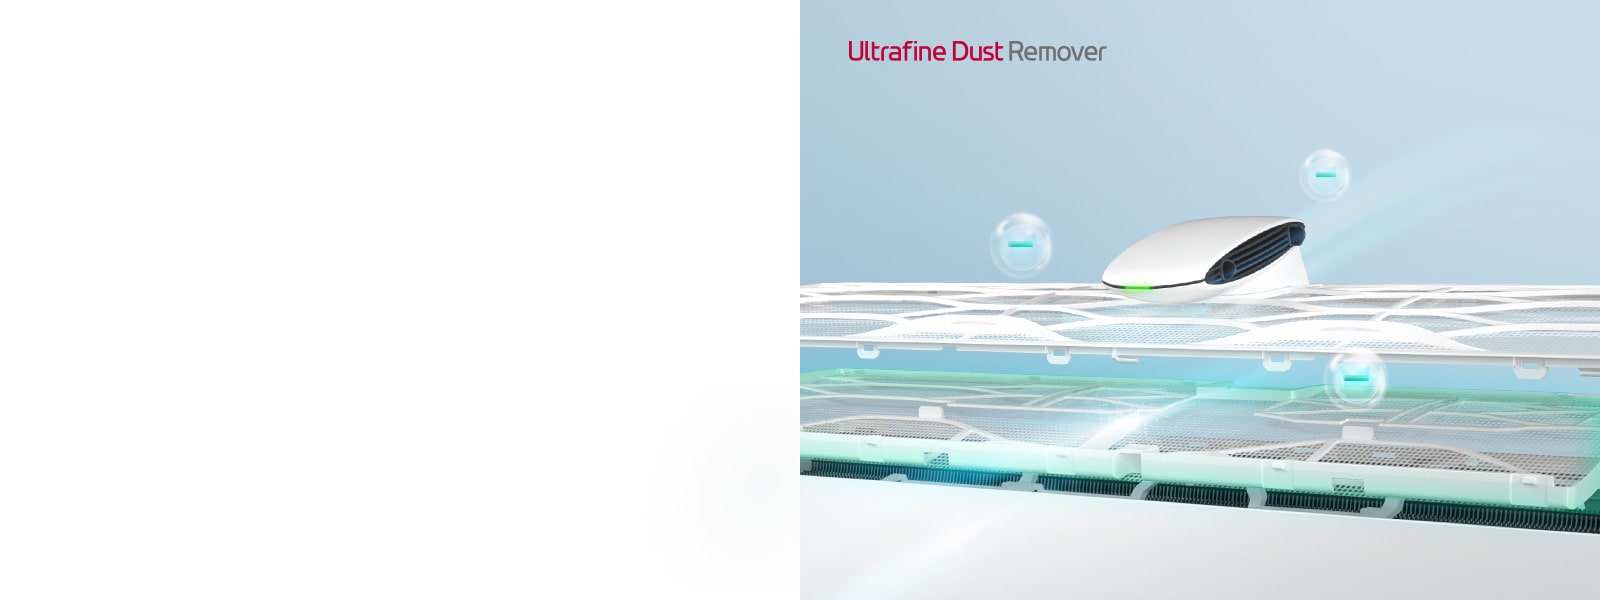 A close up image of the air going through the ultrafine dust remover and catching the dust and particles filtering through. Reads Ultrafine Dust Remover in the upper left corner.